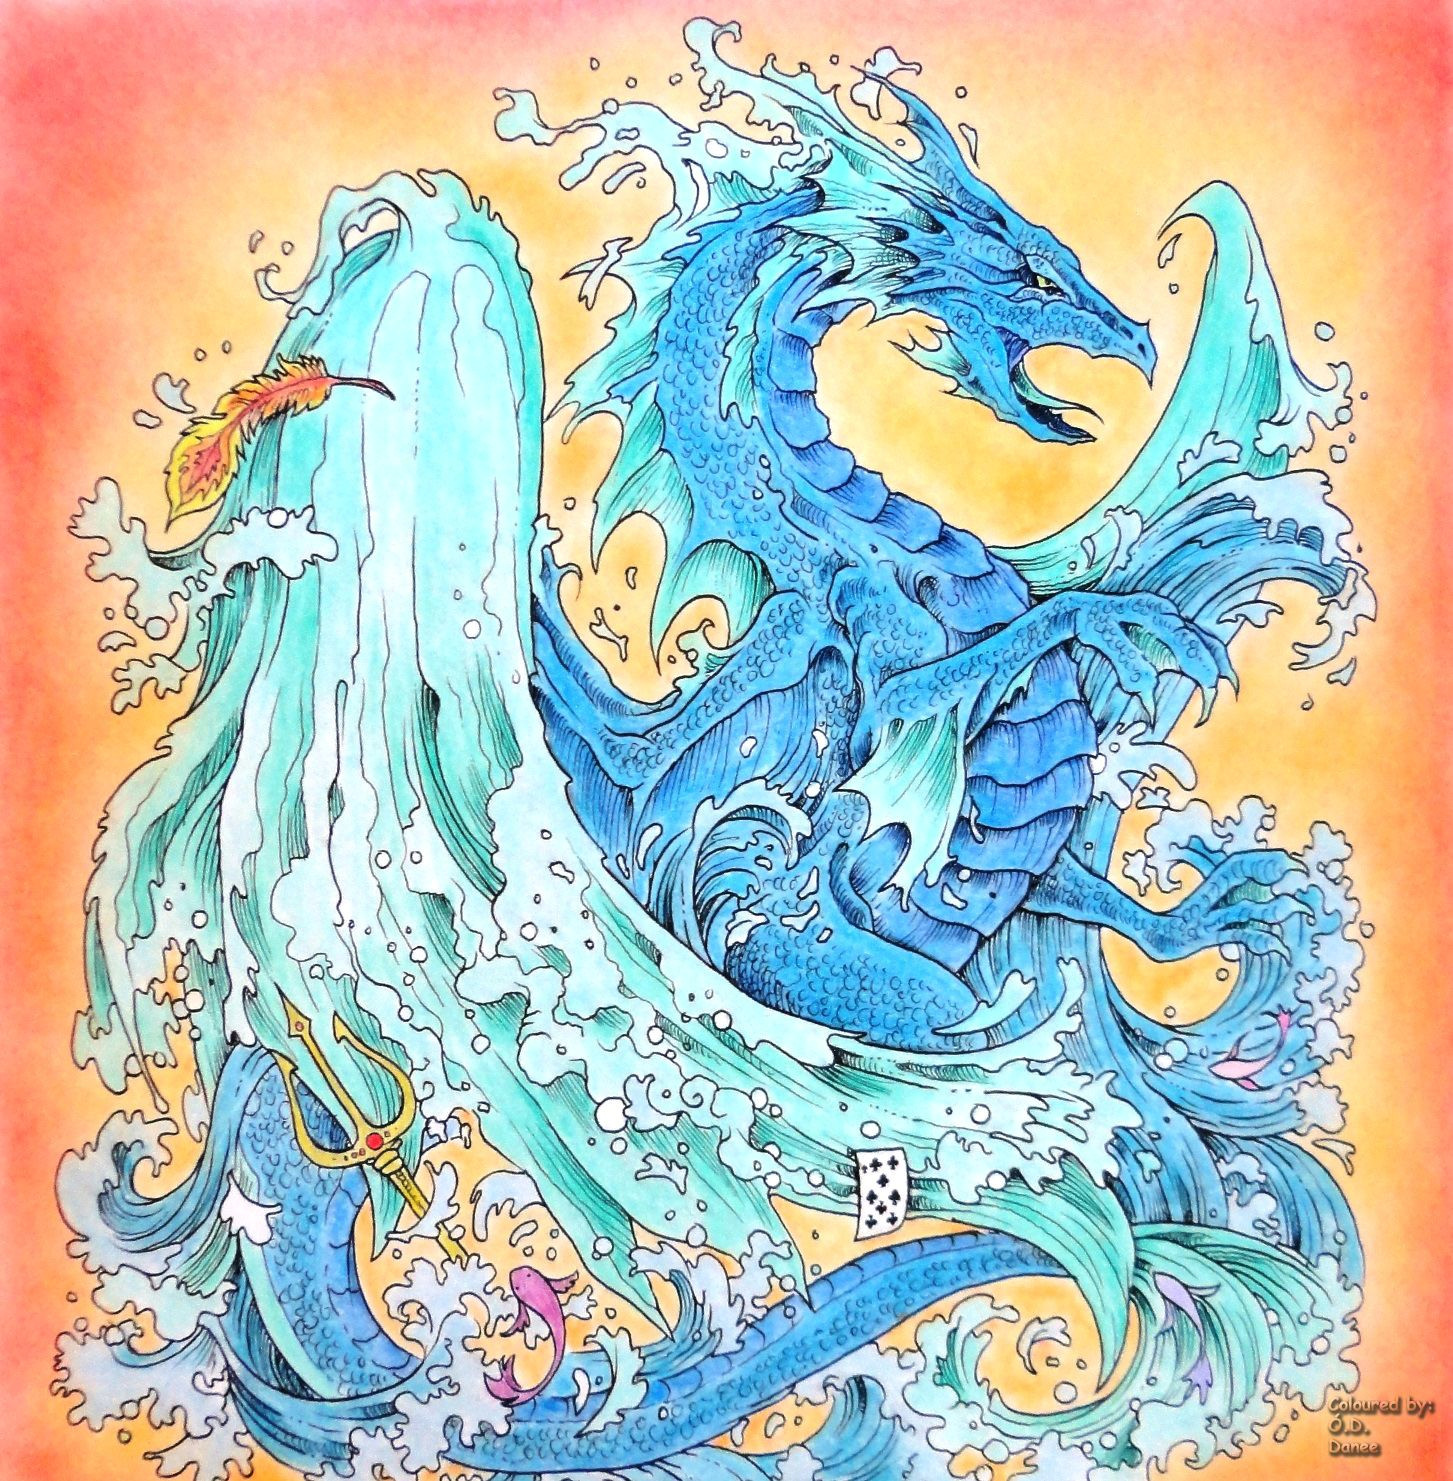 Colored Pencil Drawings Of Dragons Kerby Rosanes Mythomorphia Water Dragon Coloured with Marco